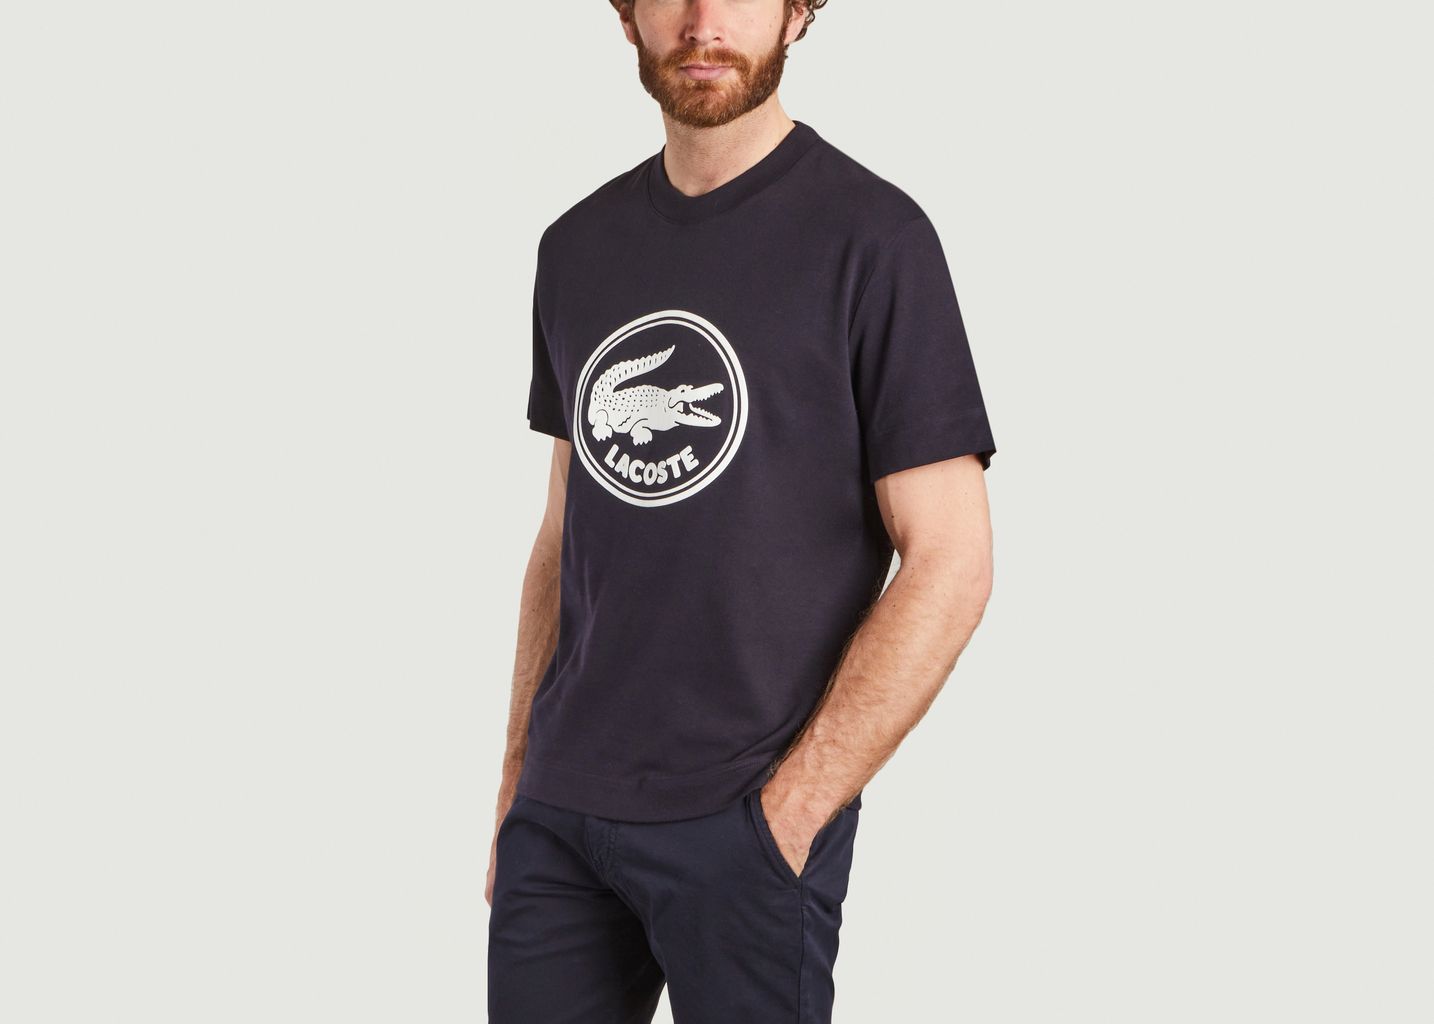 Round neck cotton T-shirt with 3D printed logo - Lacoste